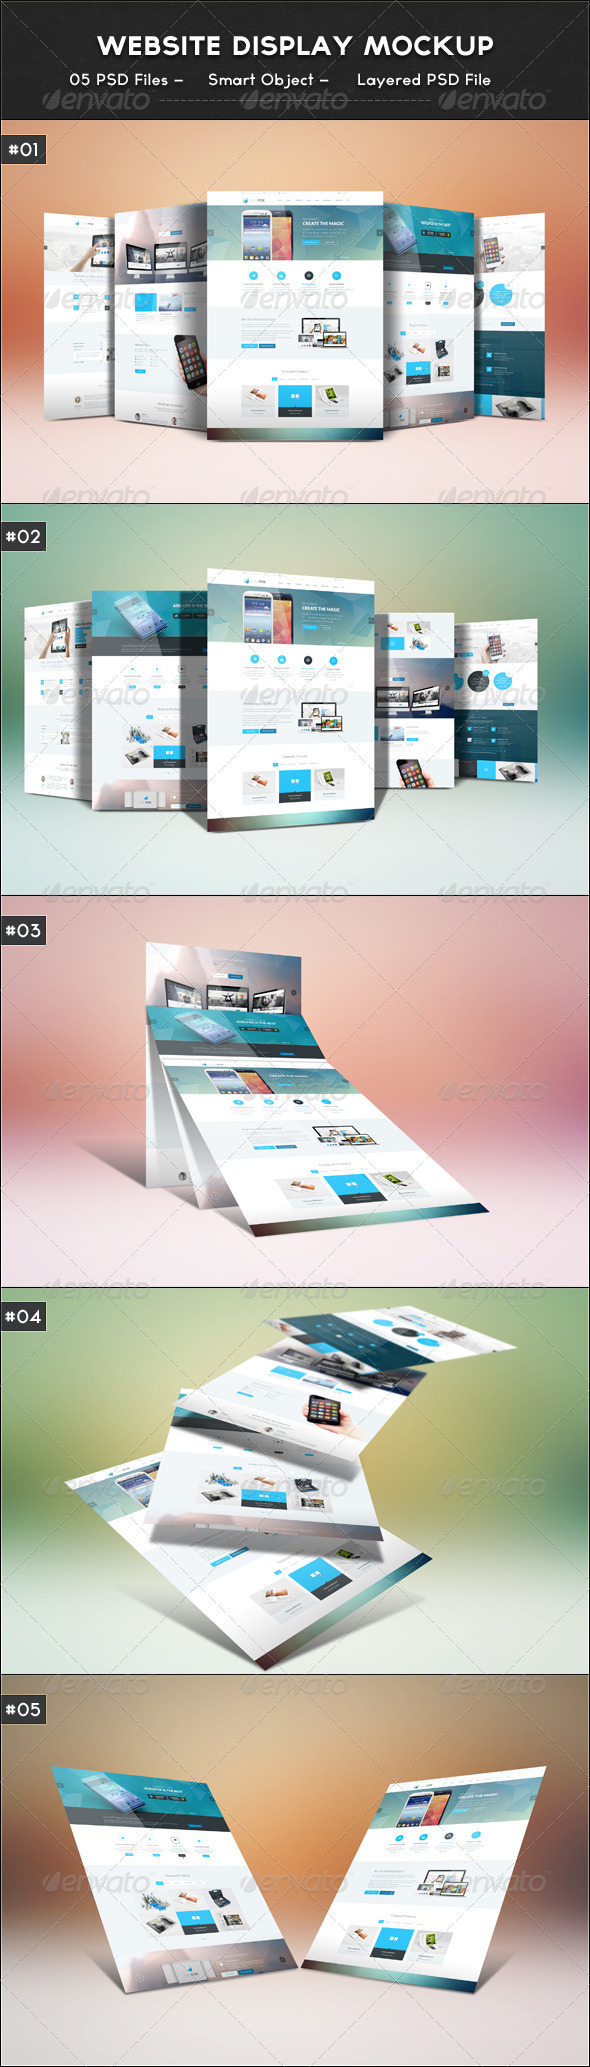 Download Website Display Mockup by RGraphicsDesign_NT | GraphicRiver